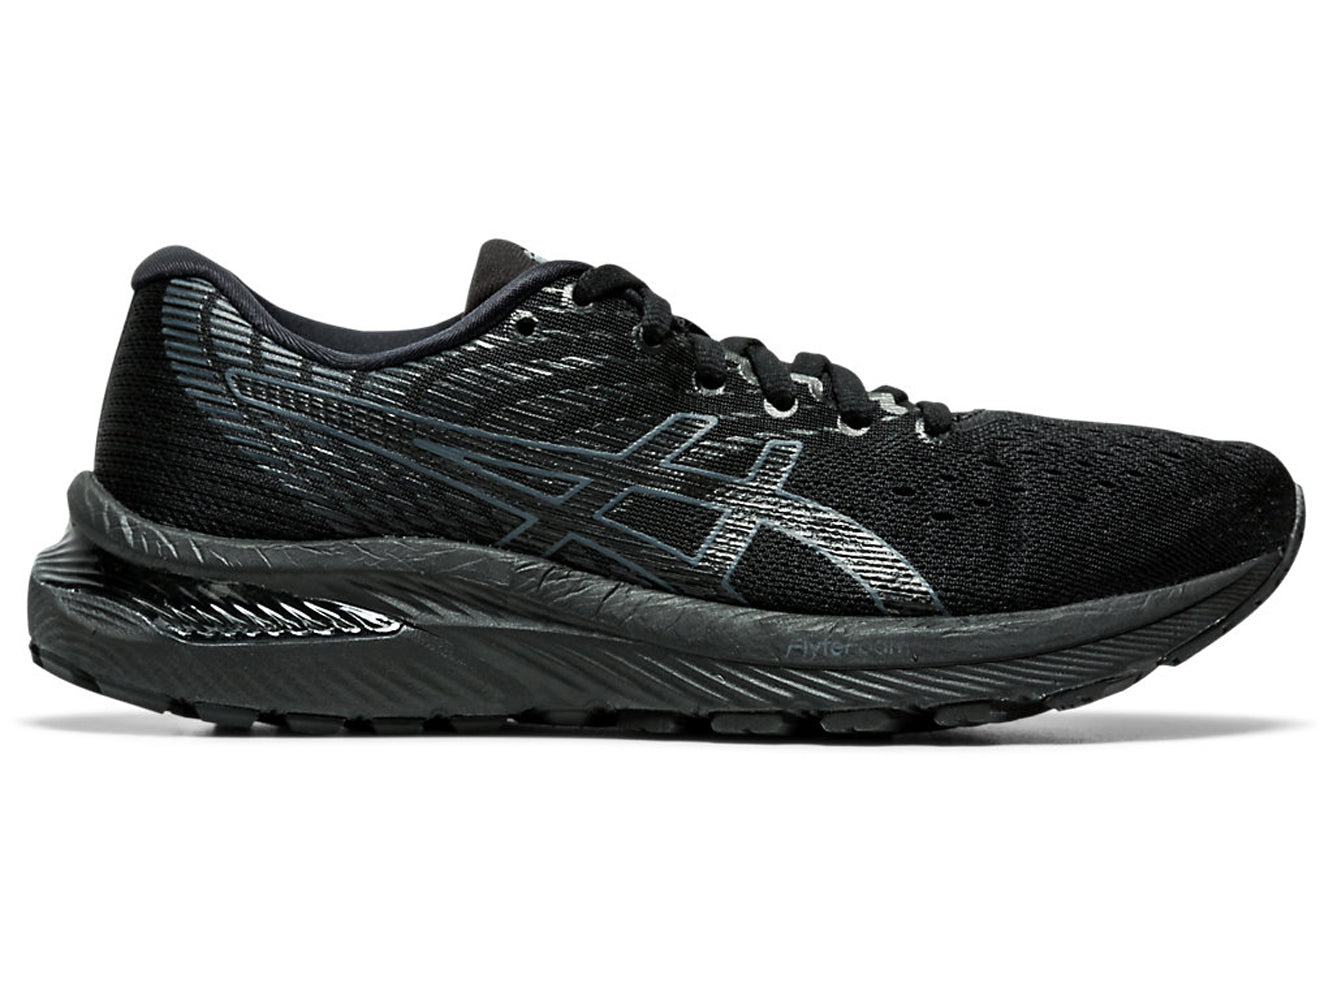 Women's Asics GEL-Cumulus 22 Running Shoe in Black/Carrier Grey from the side